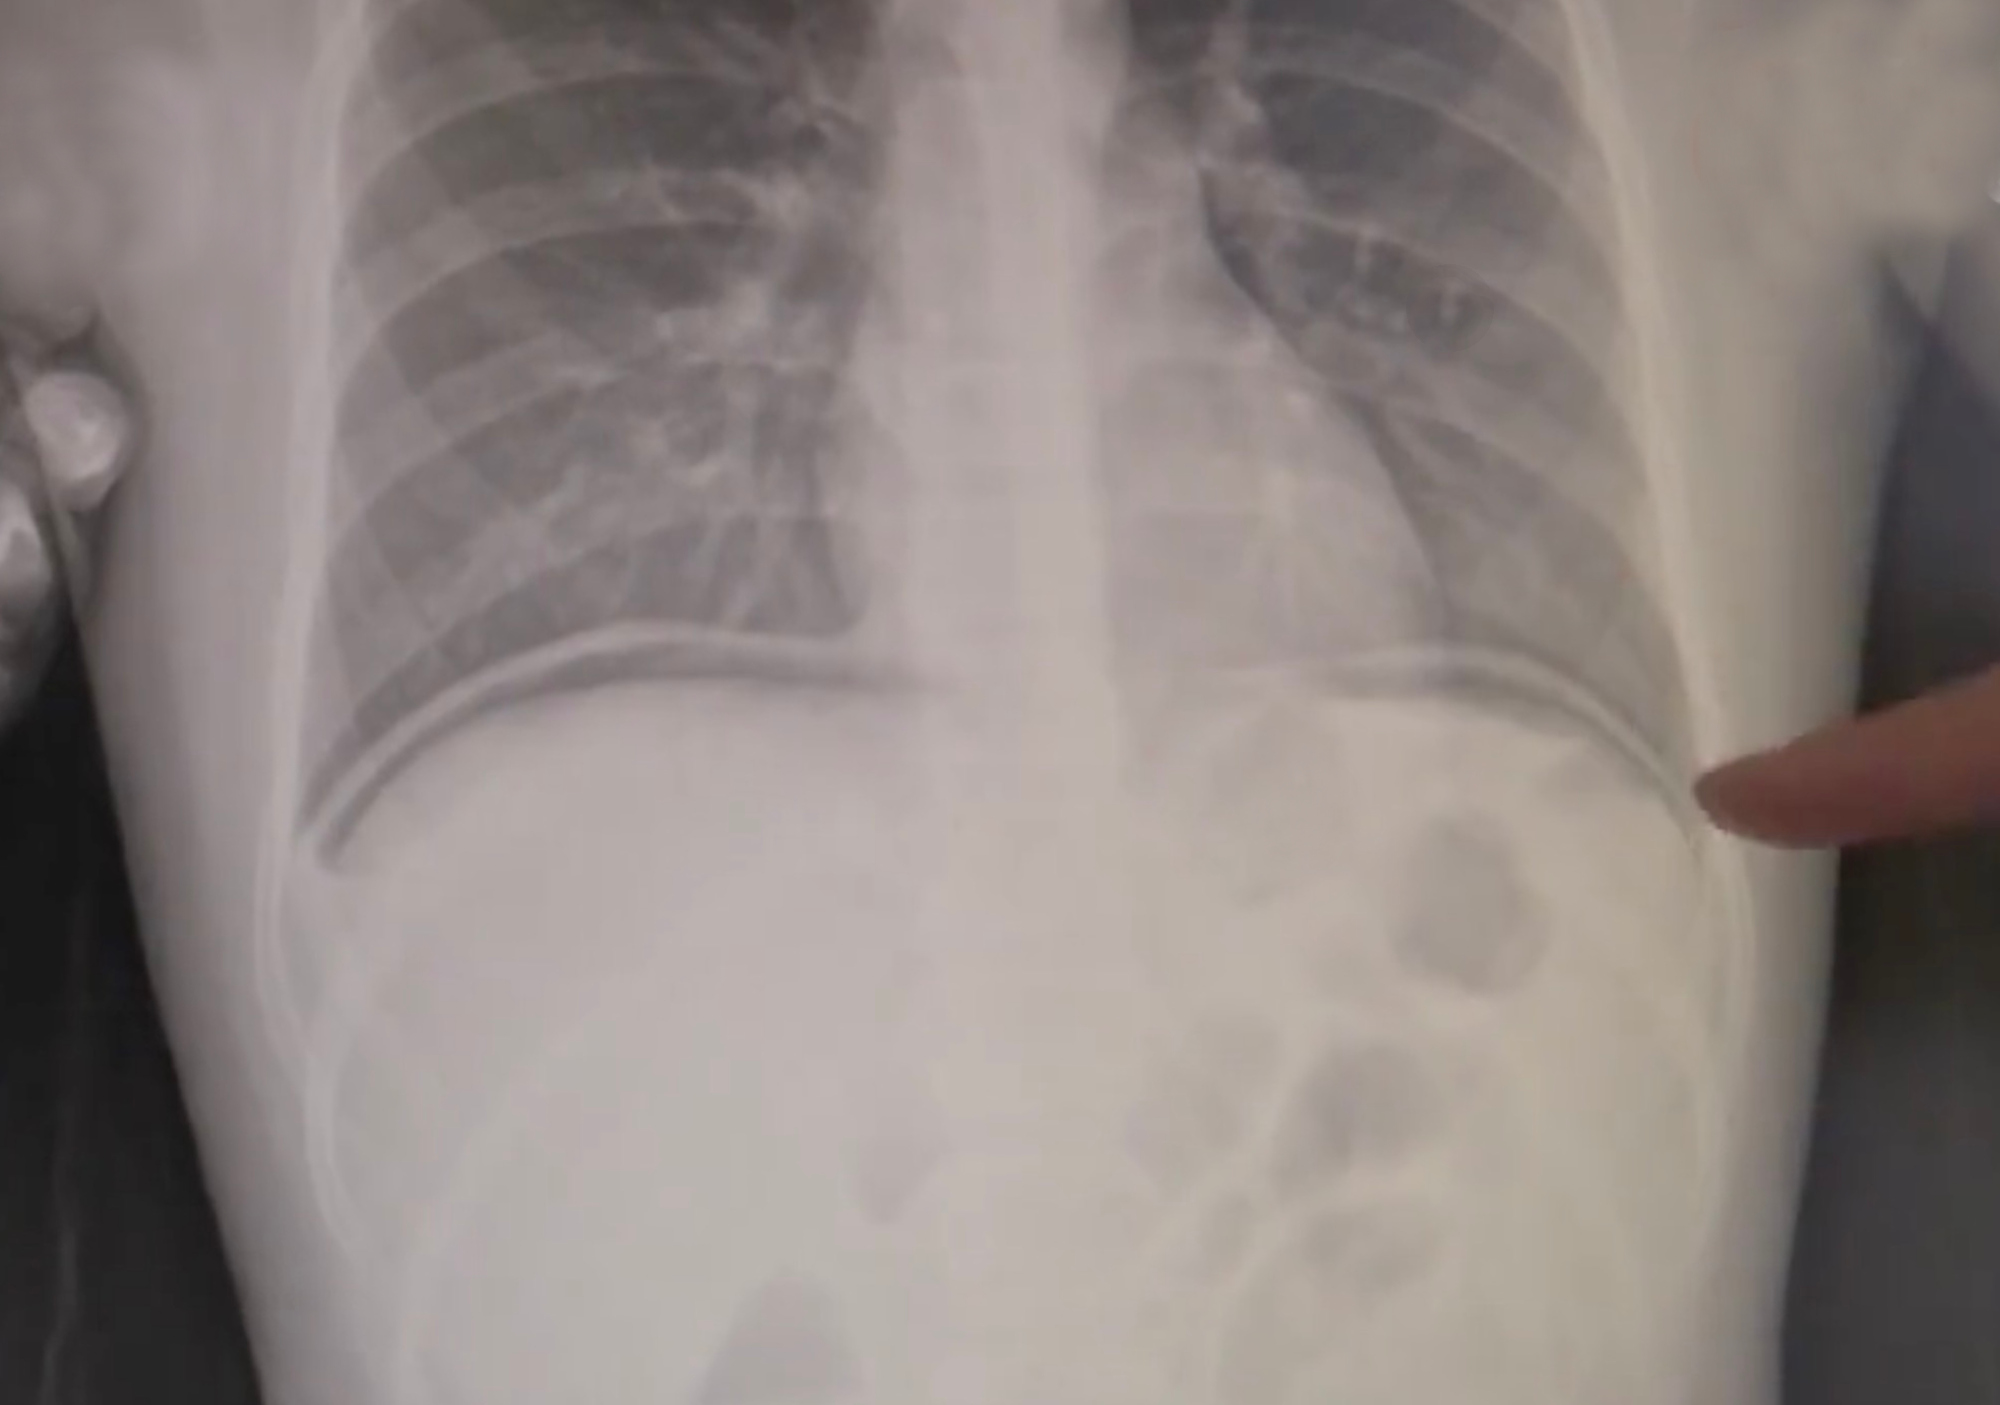 Read more about the article X-Rays: Boy Falls In Shower And Rams Brush Handle Up Bum